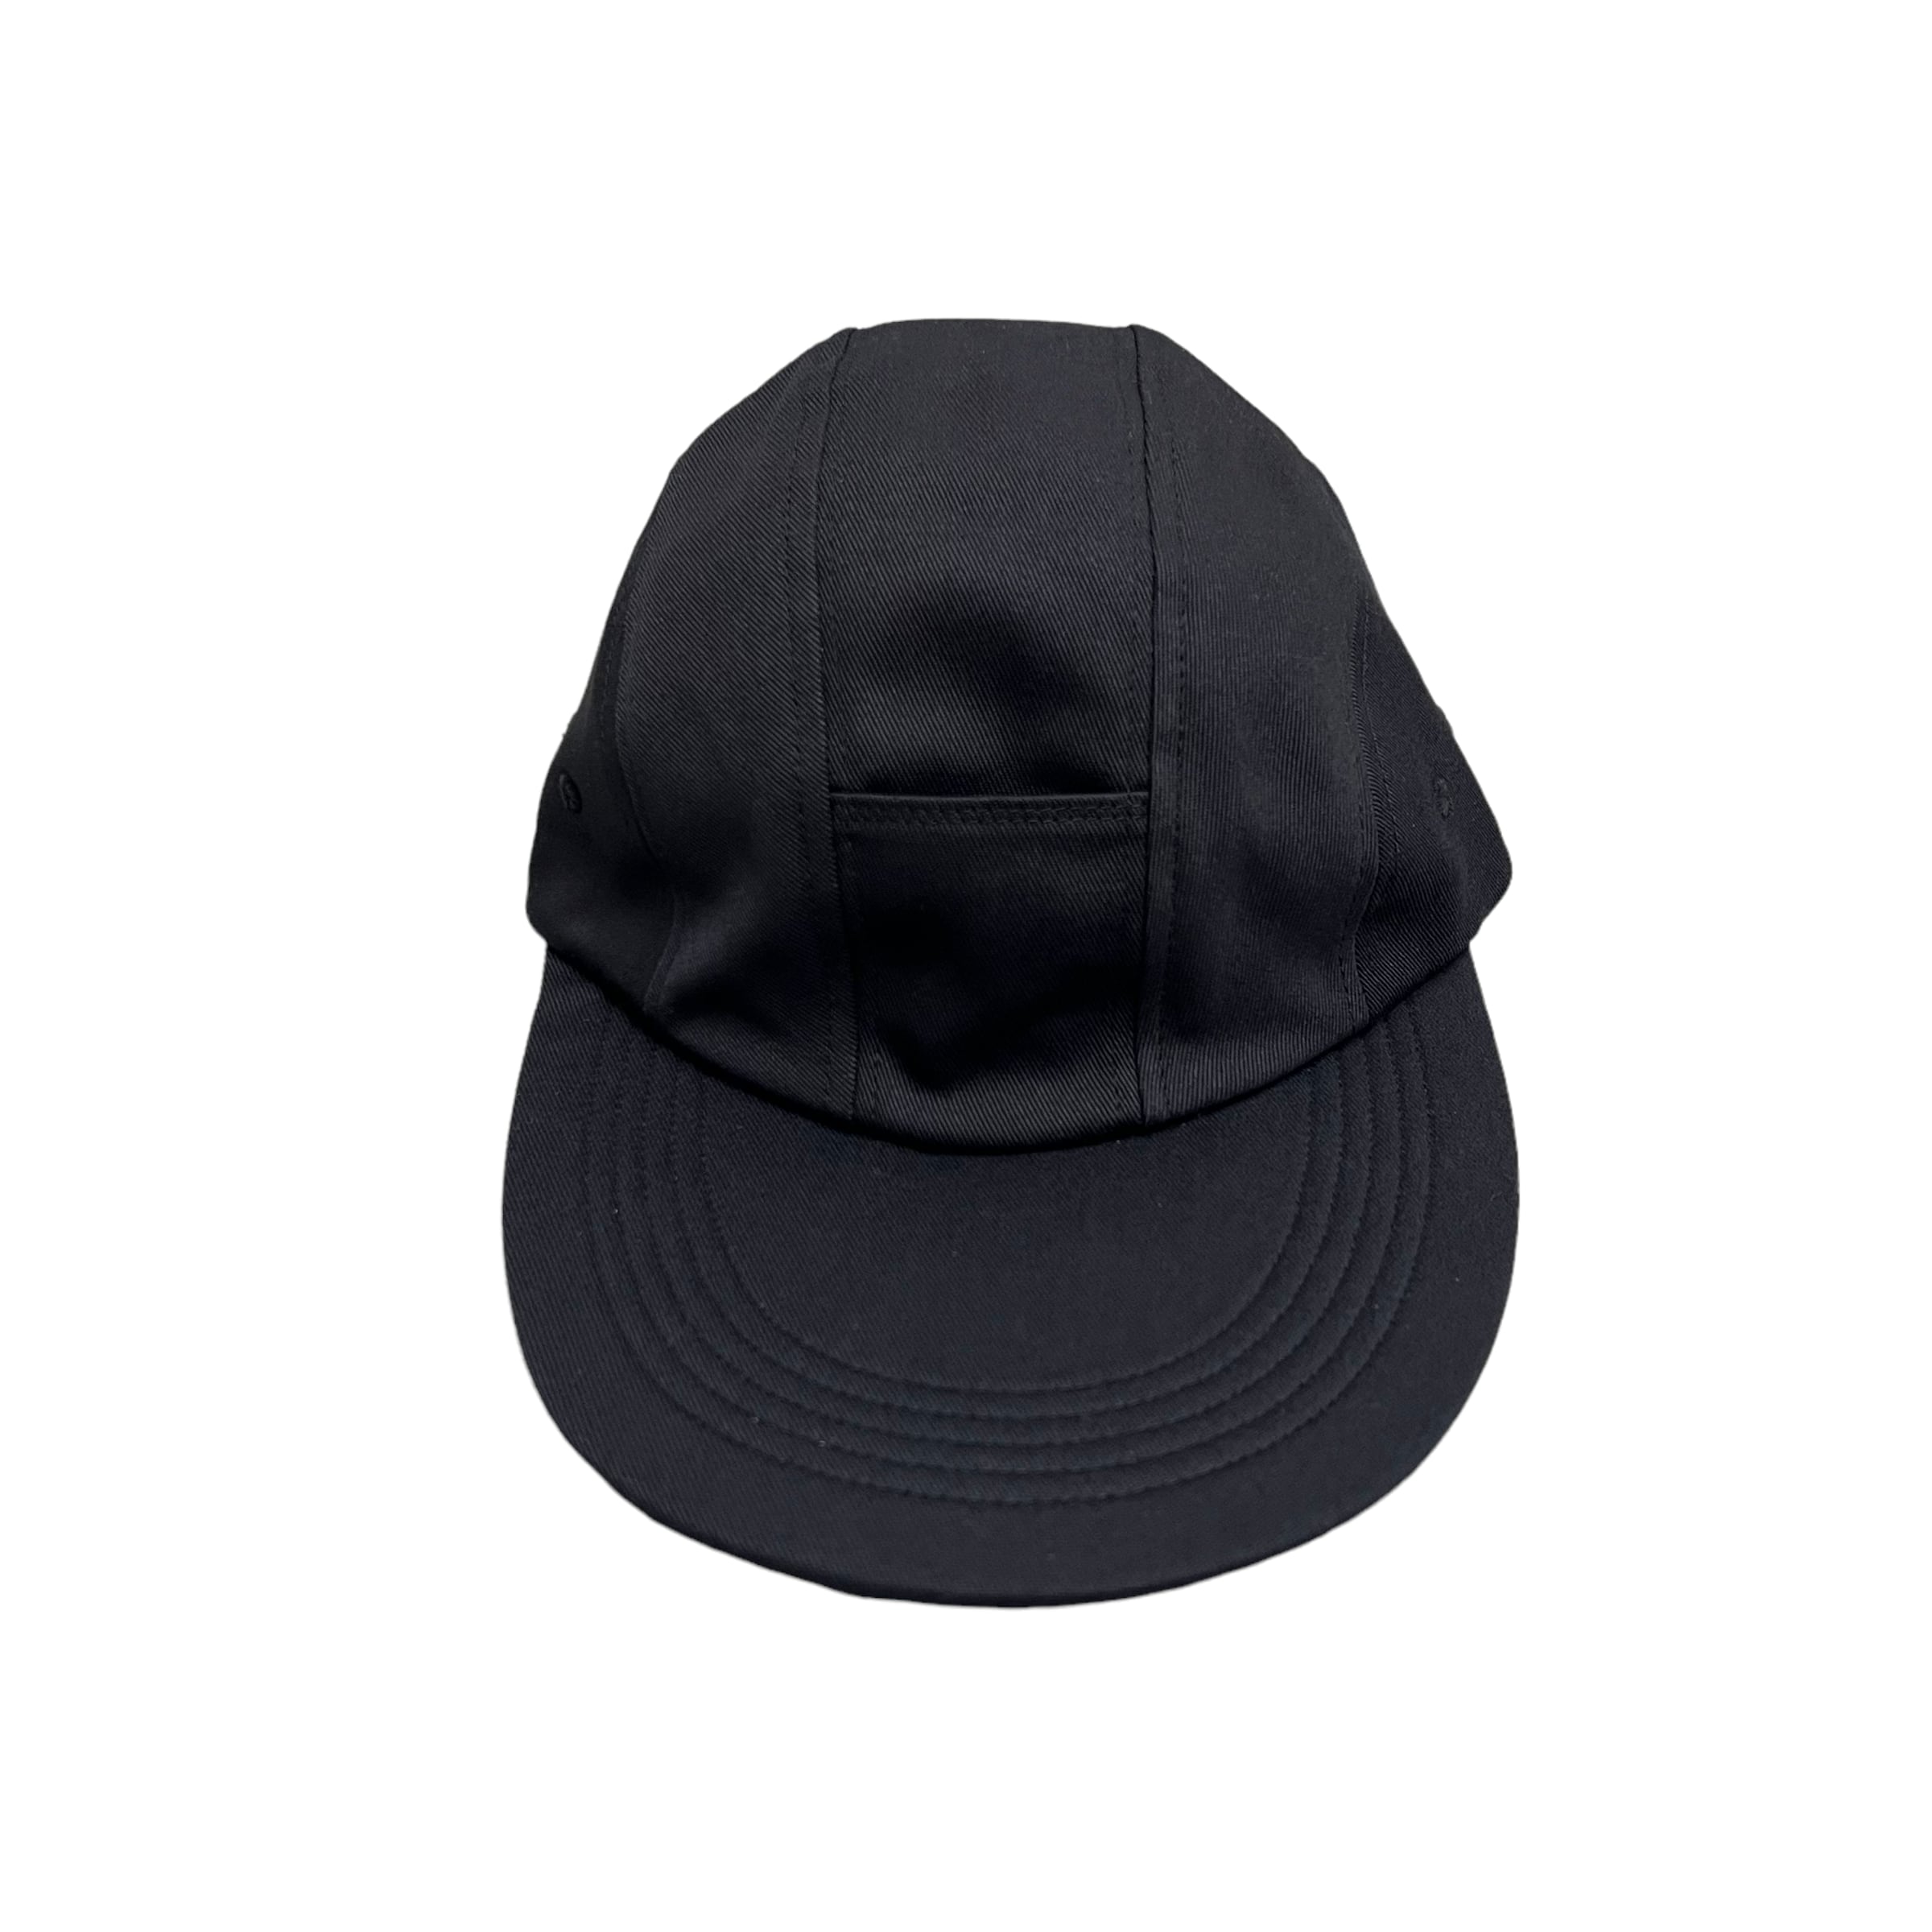 NOROLL / TICKET CAP BLACK | THE NEWAGE CLUB